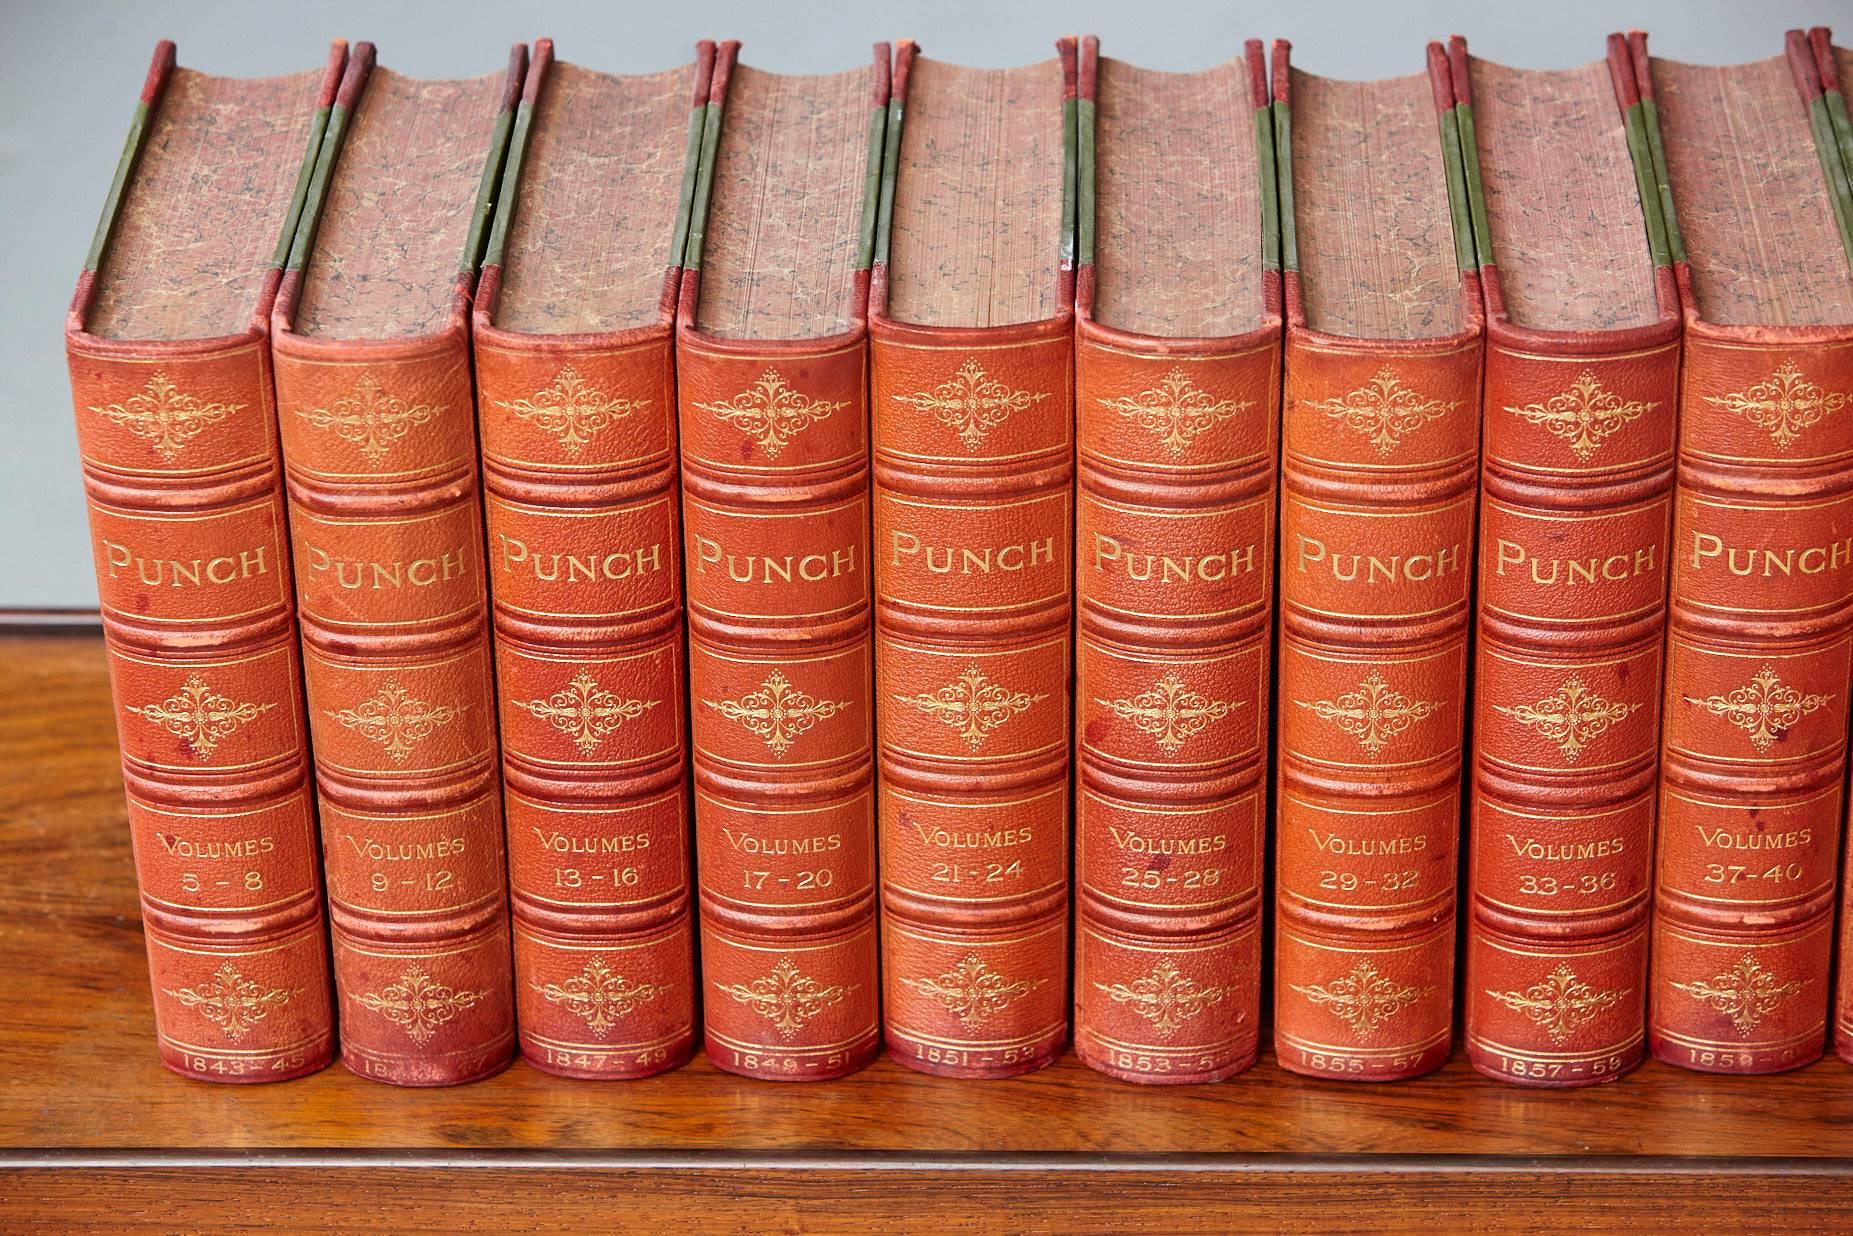 British Set of 24 Leather Bound Volumes of Punch No 5-100 from the Estate of José Ferrer